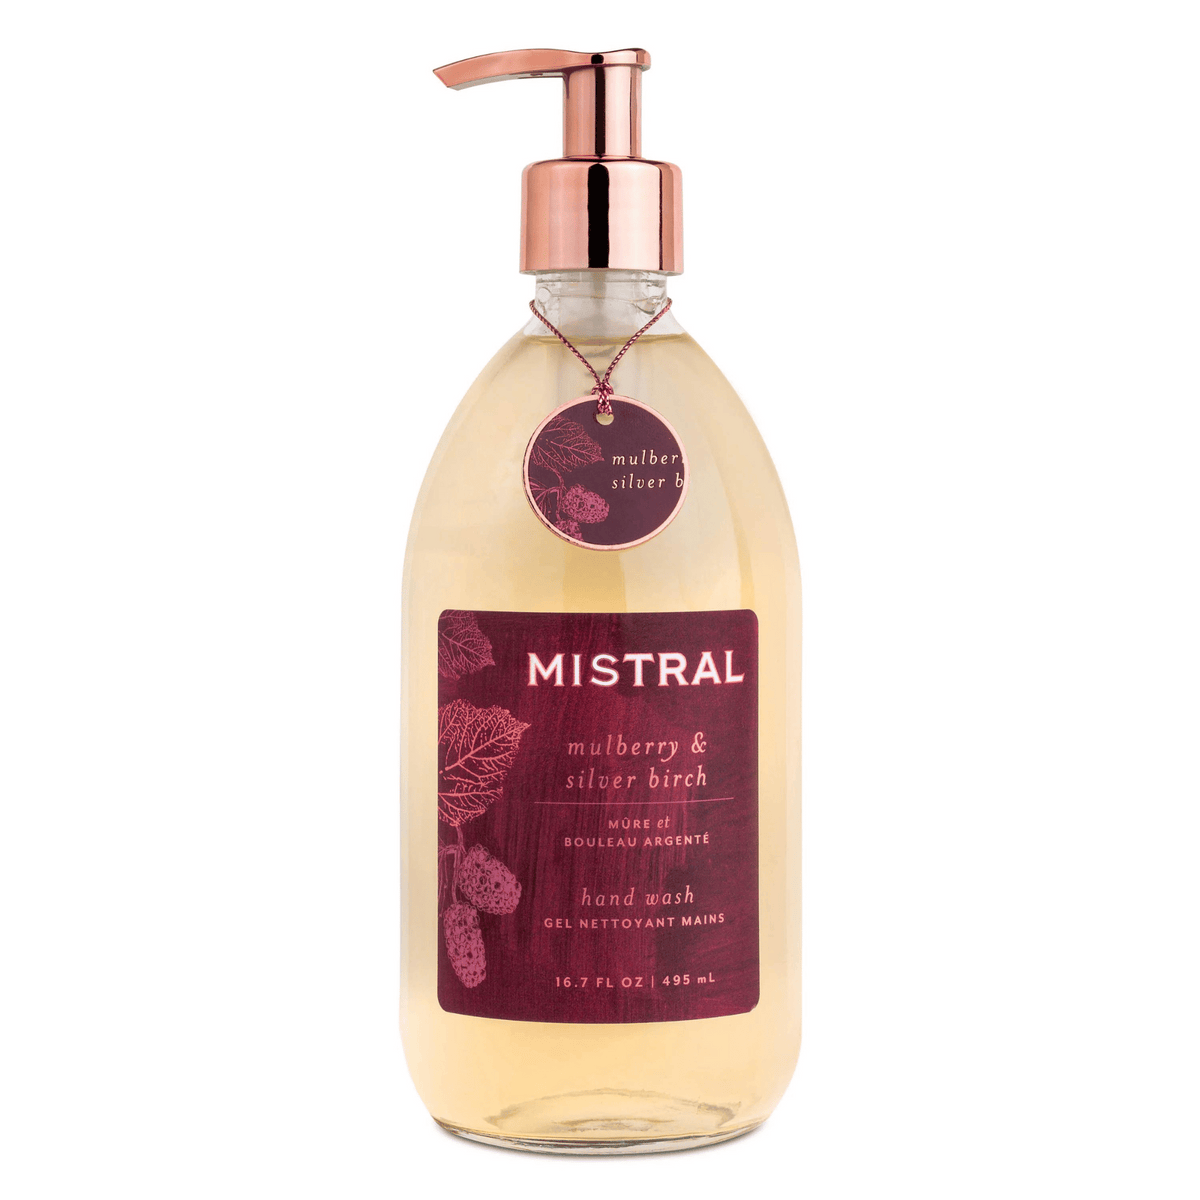 Primary Image of Mulberry and Silver Birch Hand Wash